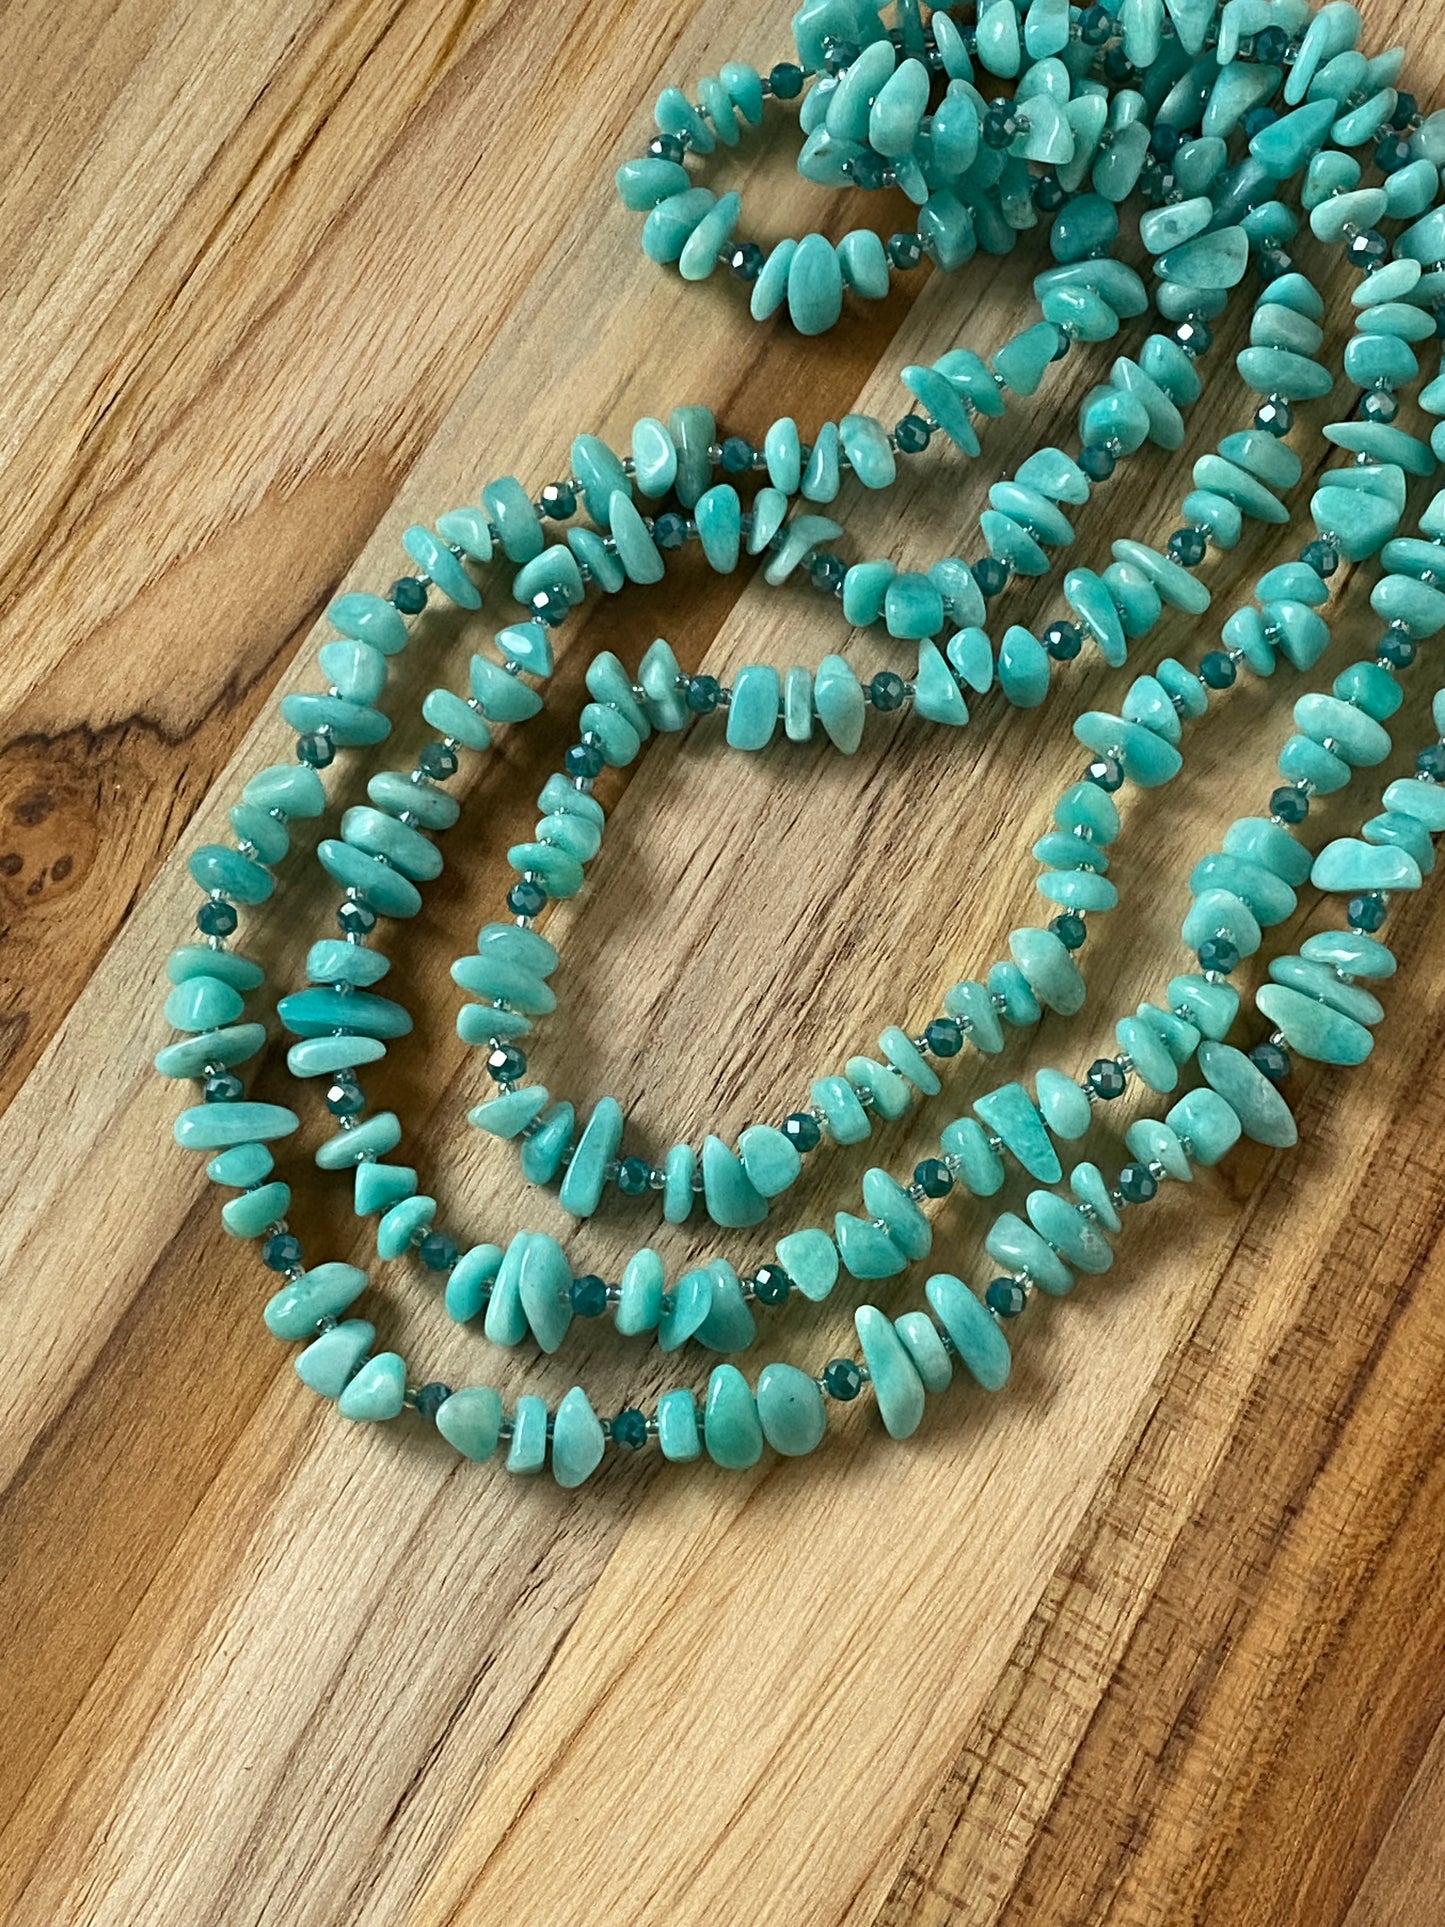 60" Extra Long Beaded Wraparound Amazonite Chip Bead Necklace with Crystals